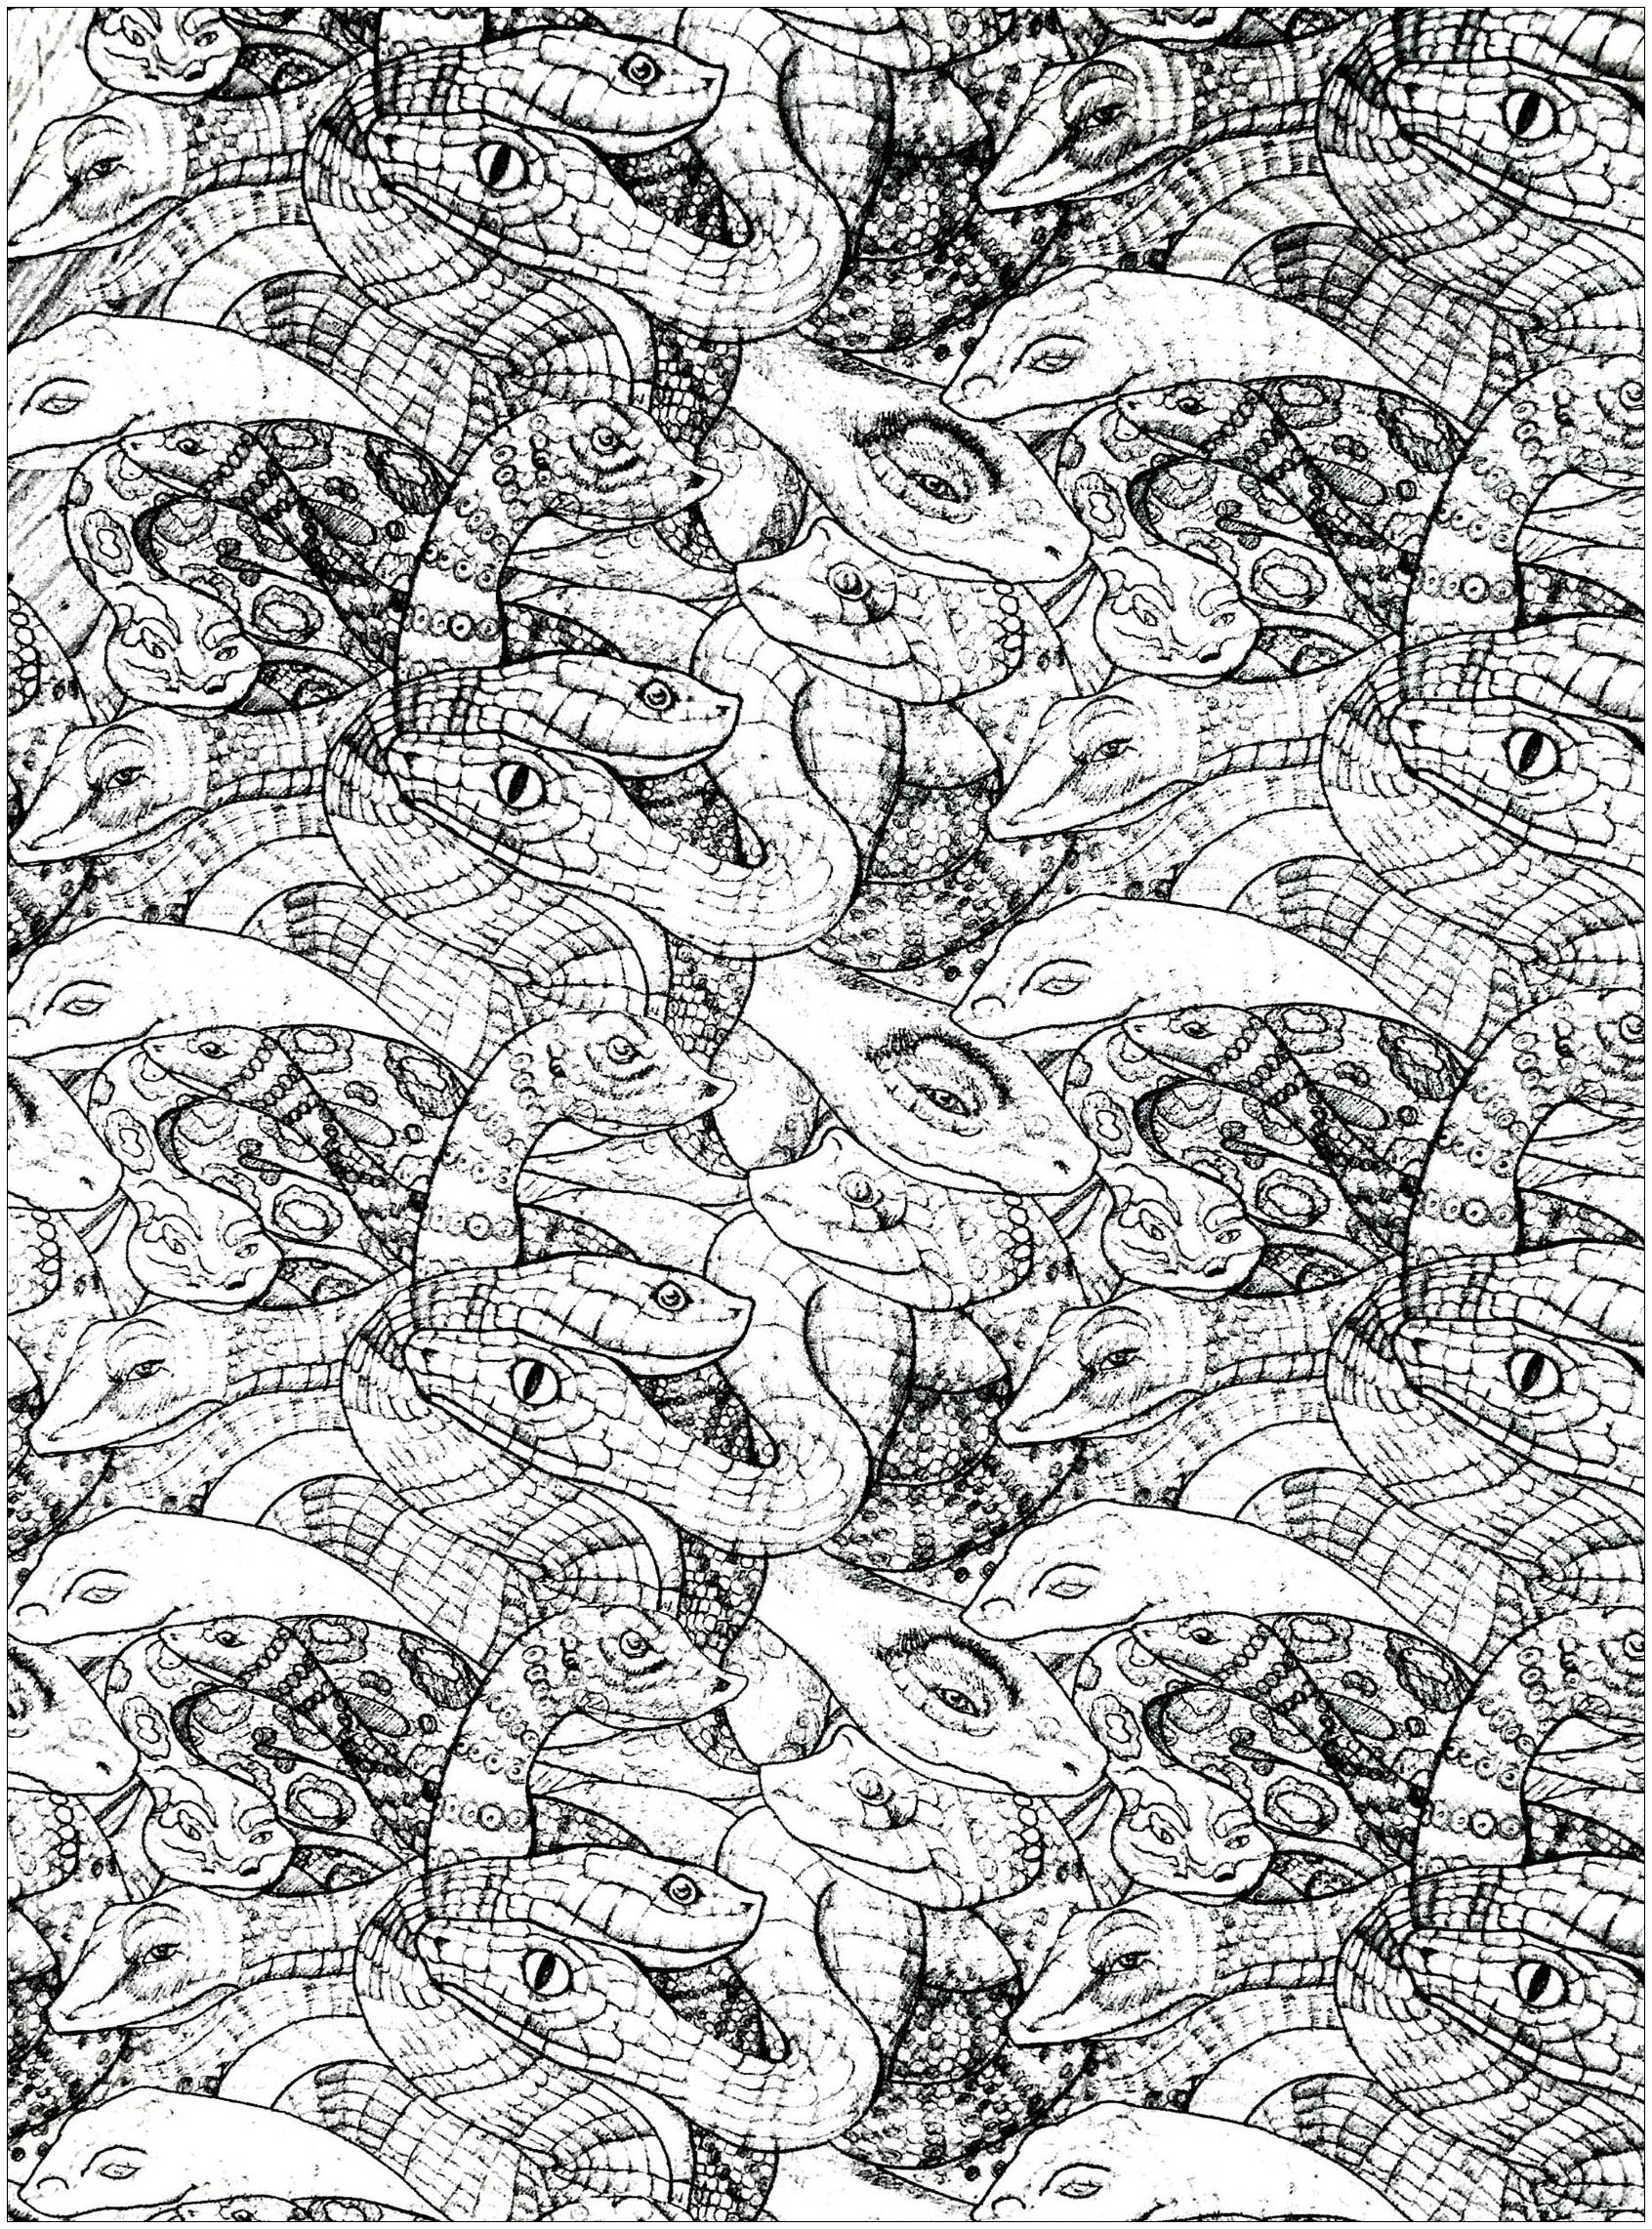 Drawing of entangled and very numerous snakes with scales drawn in a precise and realistic way